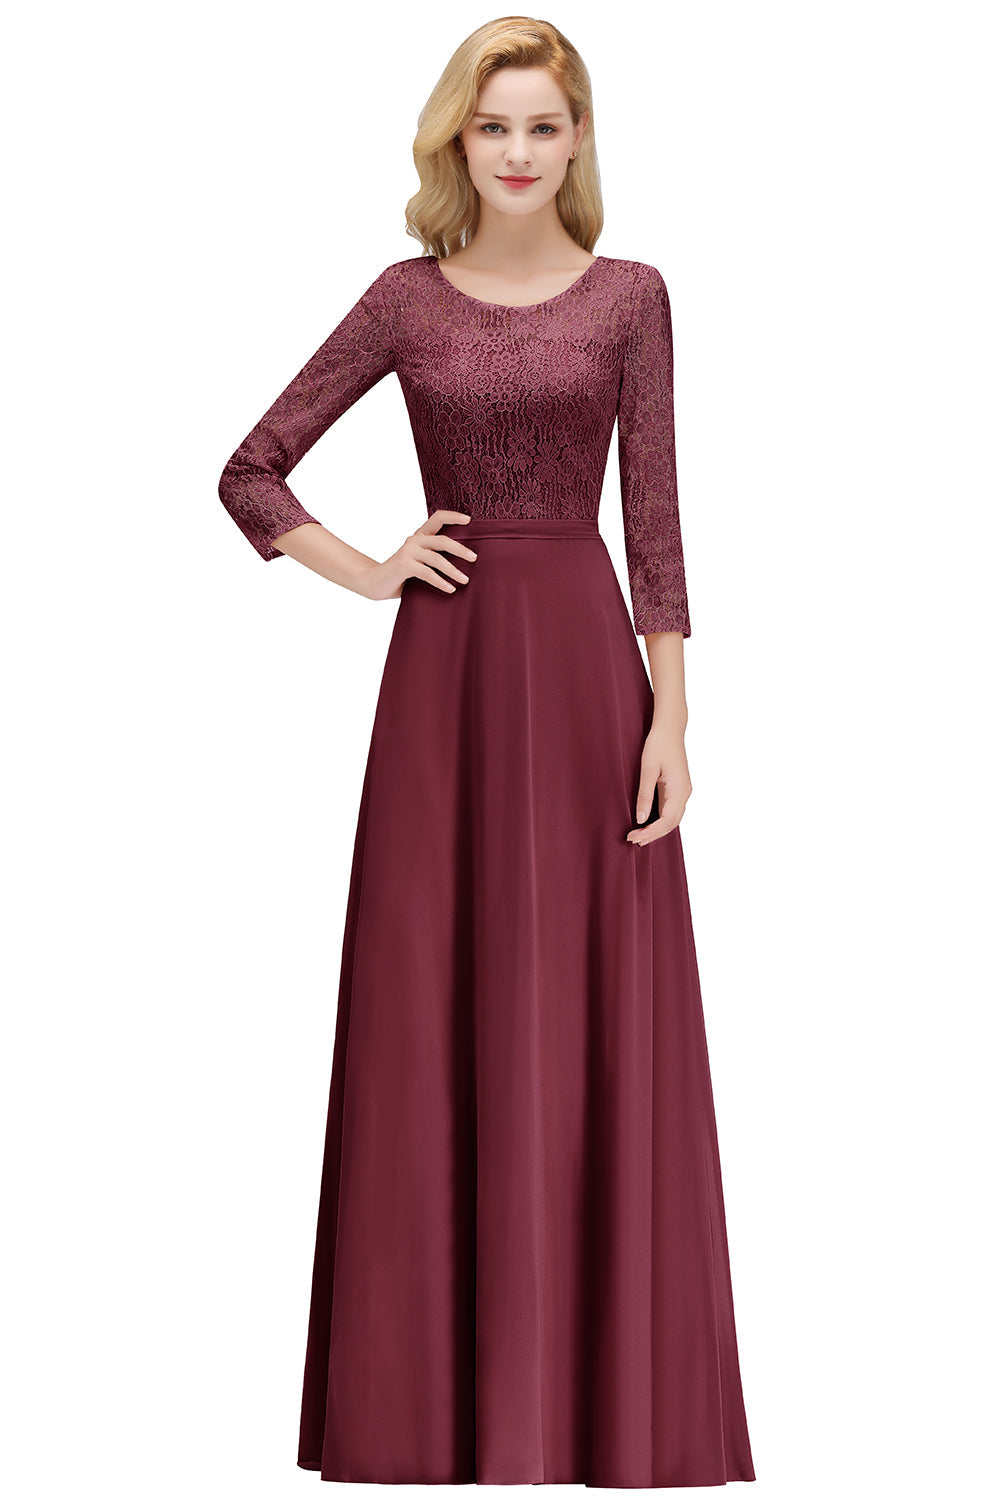 Pink Lace Long Evening Dresses with Sleeves | A-Line Scoop Bridesmaid Dresses